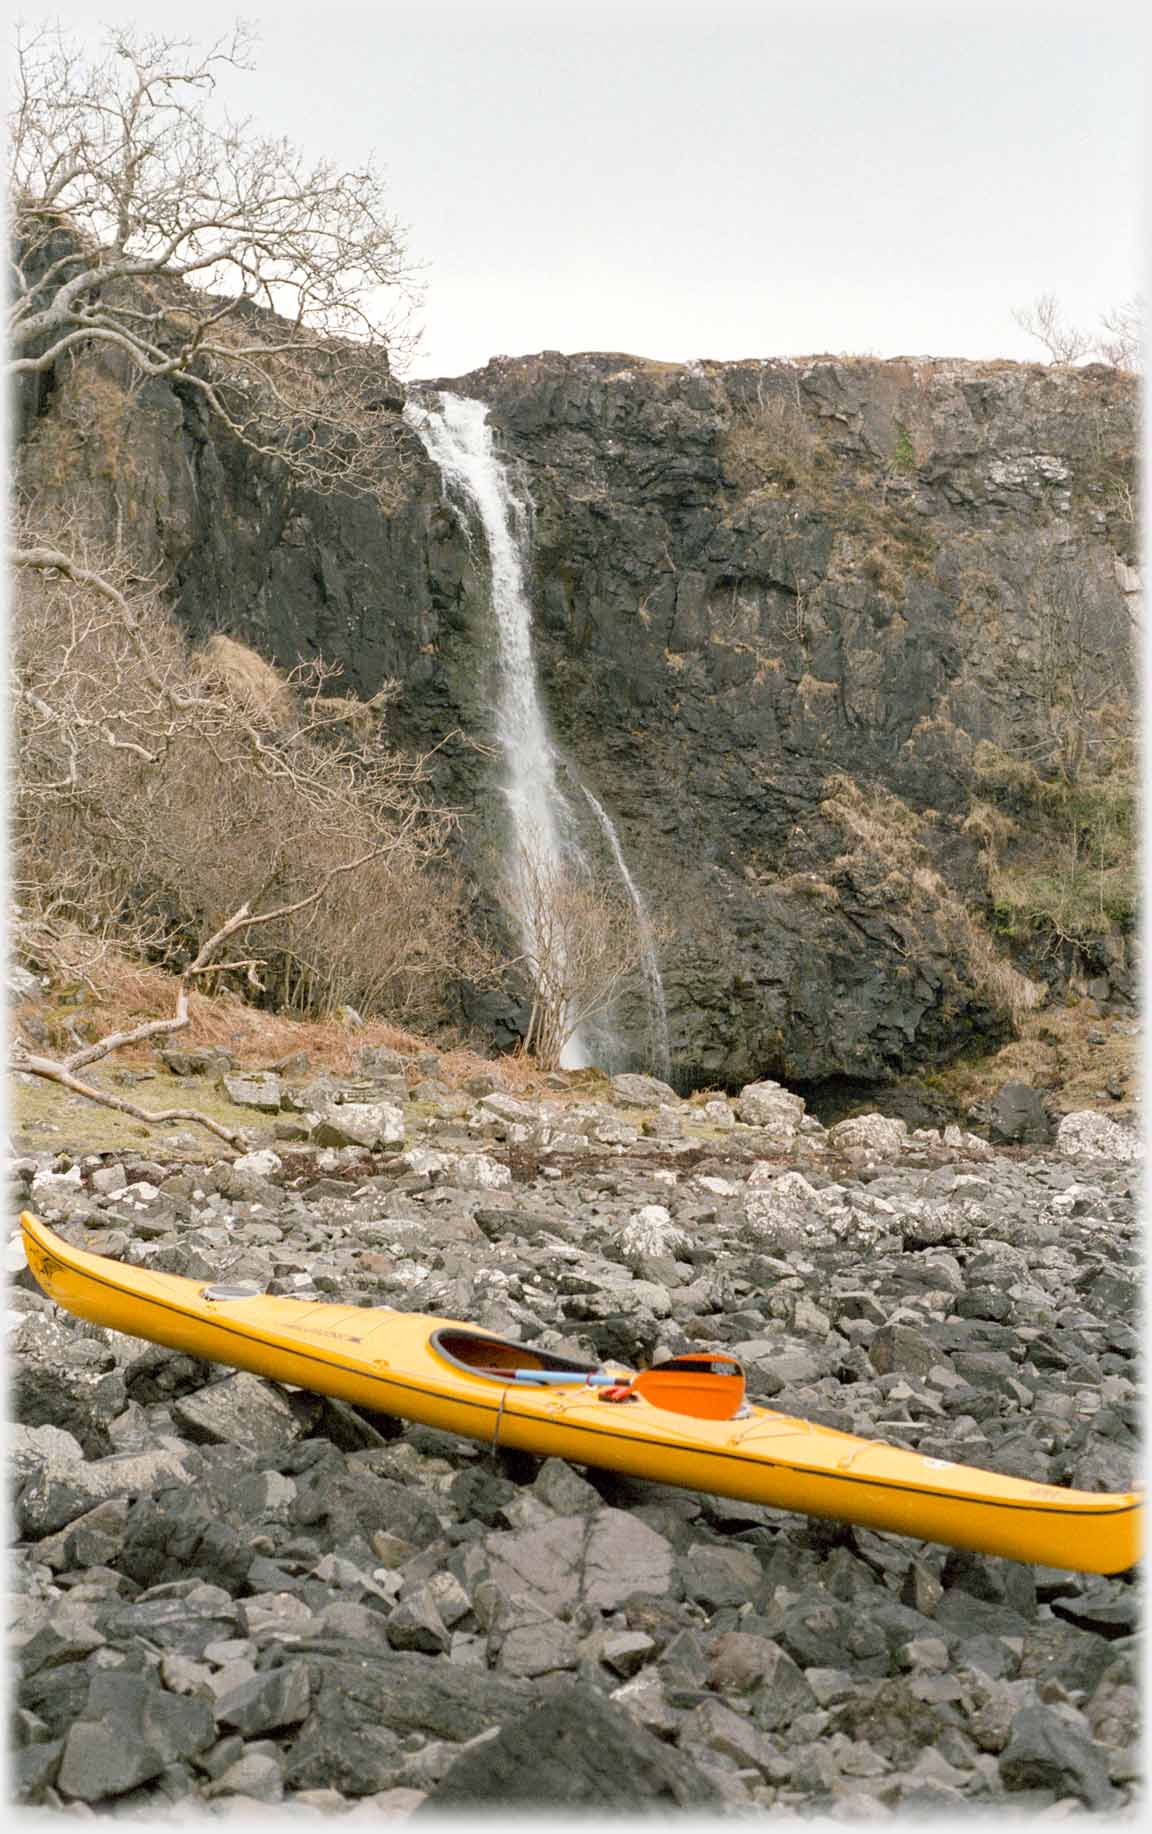 Waterfall with canoe on rocks in front.